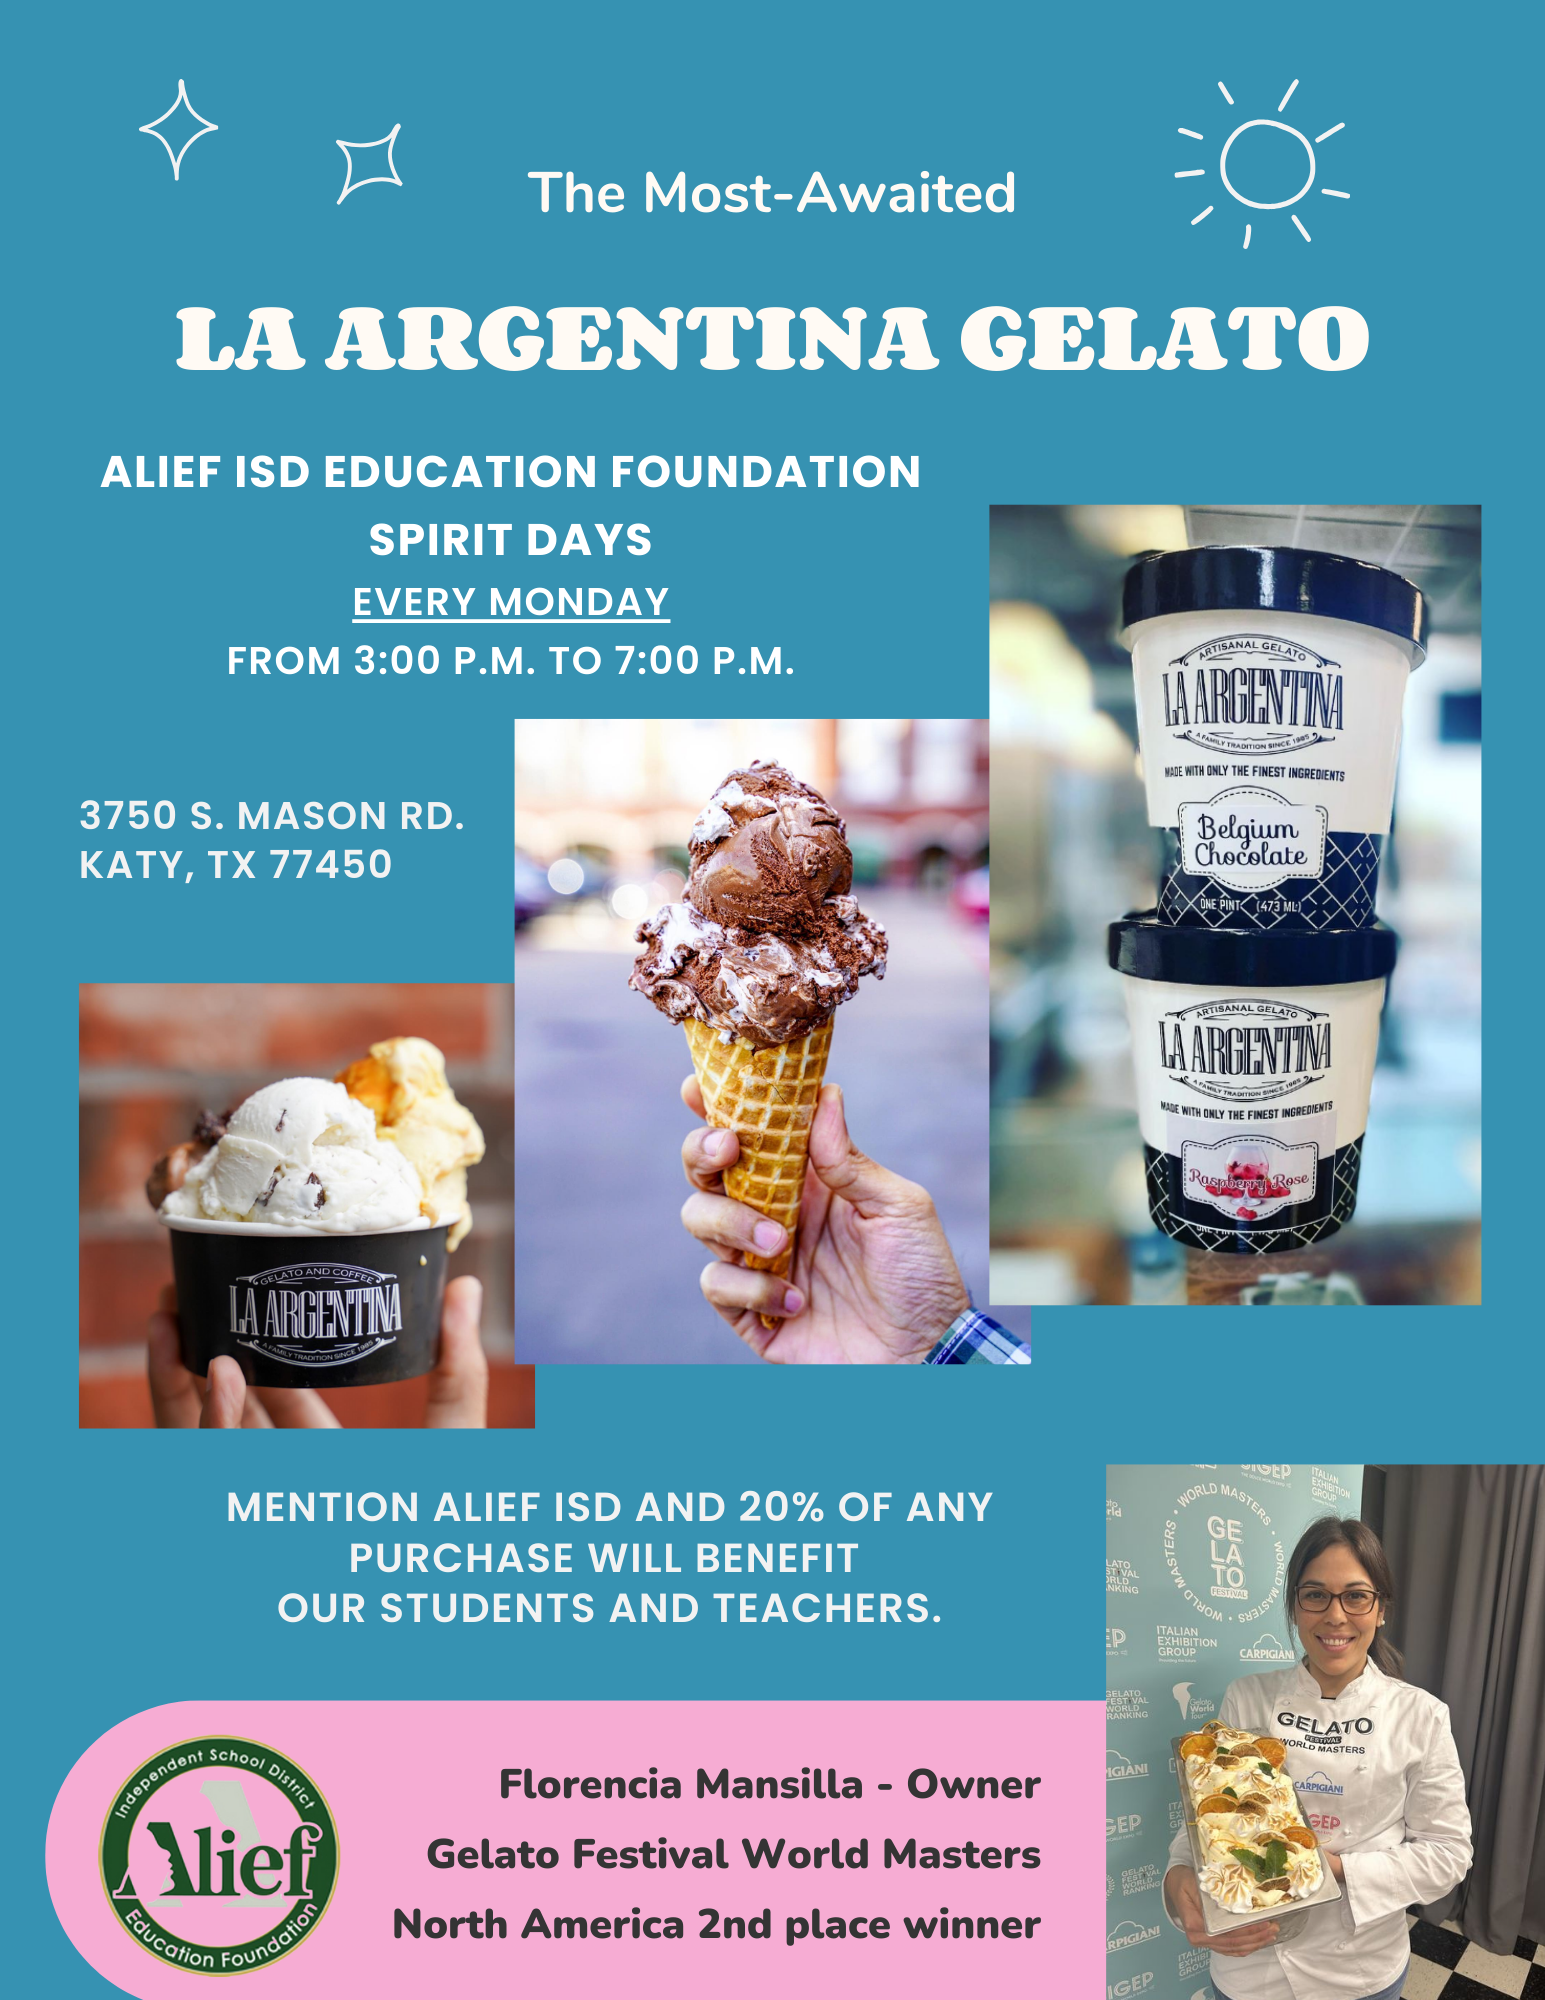 The most awaited la Argentina gelato Alief ISD education foundation spirit days every Monday from 3:00p to 7:00p 3750 S. Mason Rd.  Katy TX, 77450 Mention Alief ISD and 20% of any purchase will benefit our students and teachers. Owner- Florence Mansilla. North American 2nd Place Winner 